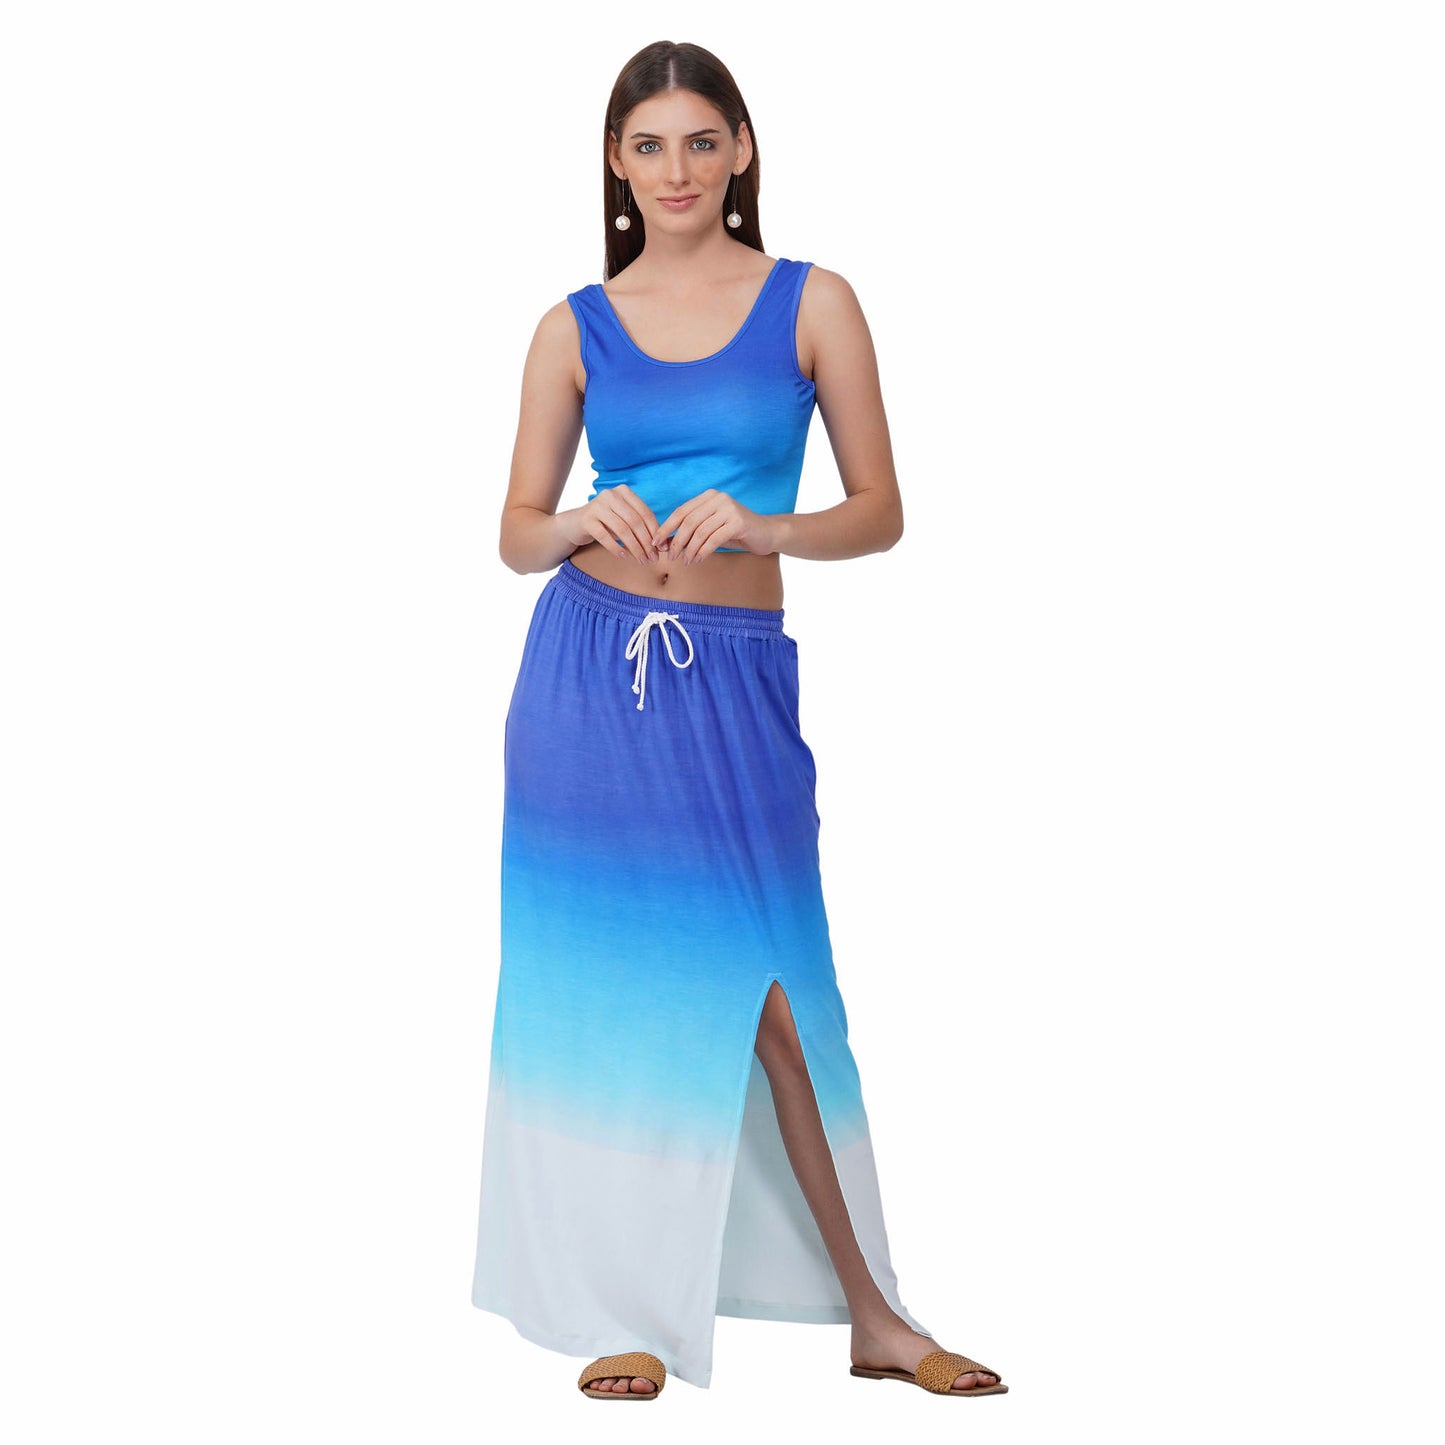 SLAY. Women's Blue to White Ombre Crop top & Skirt Co-ord Set